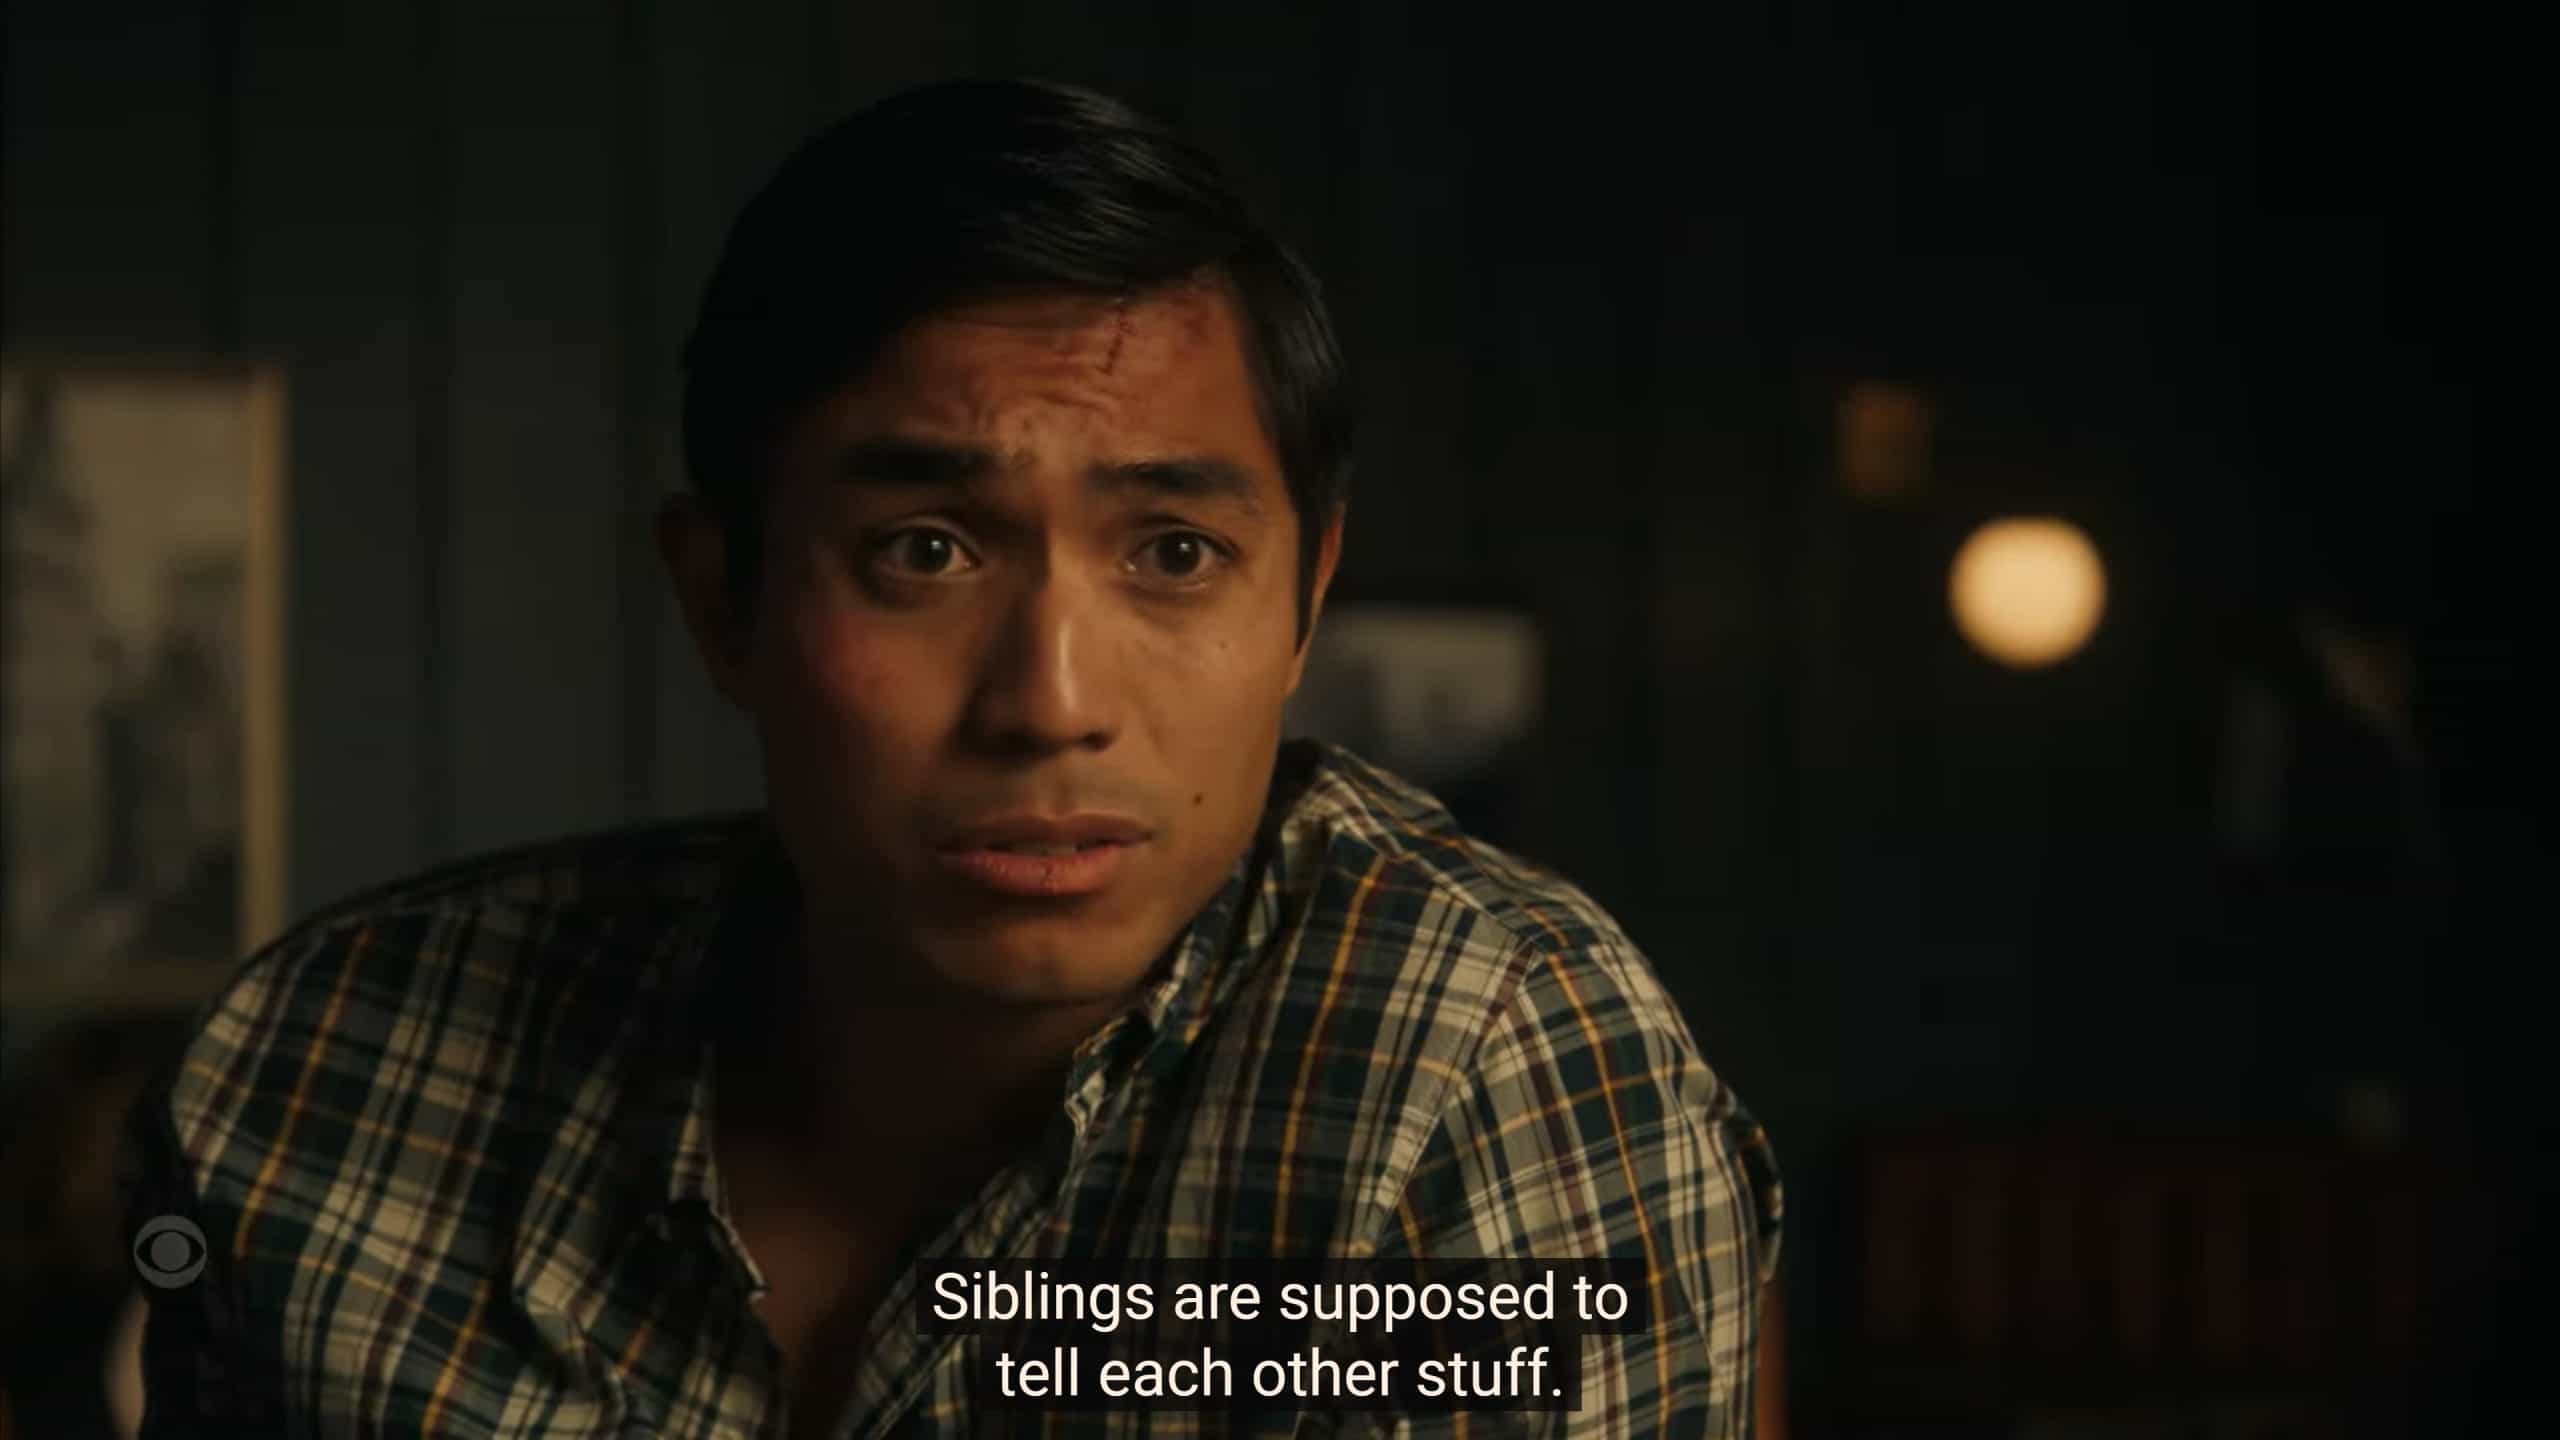 Travis Salter as Edison Bayani talking about how siblings shouldn't hide stuff from one another